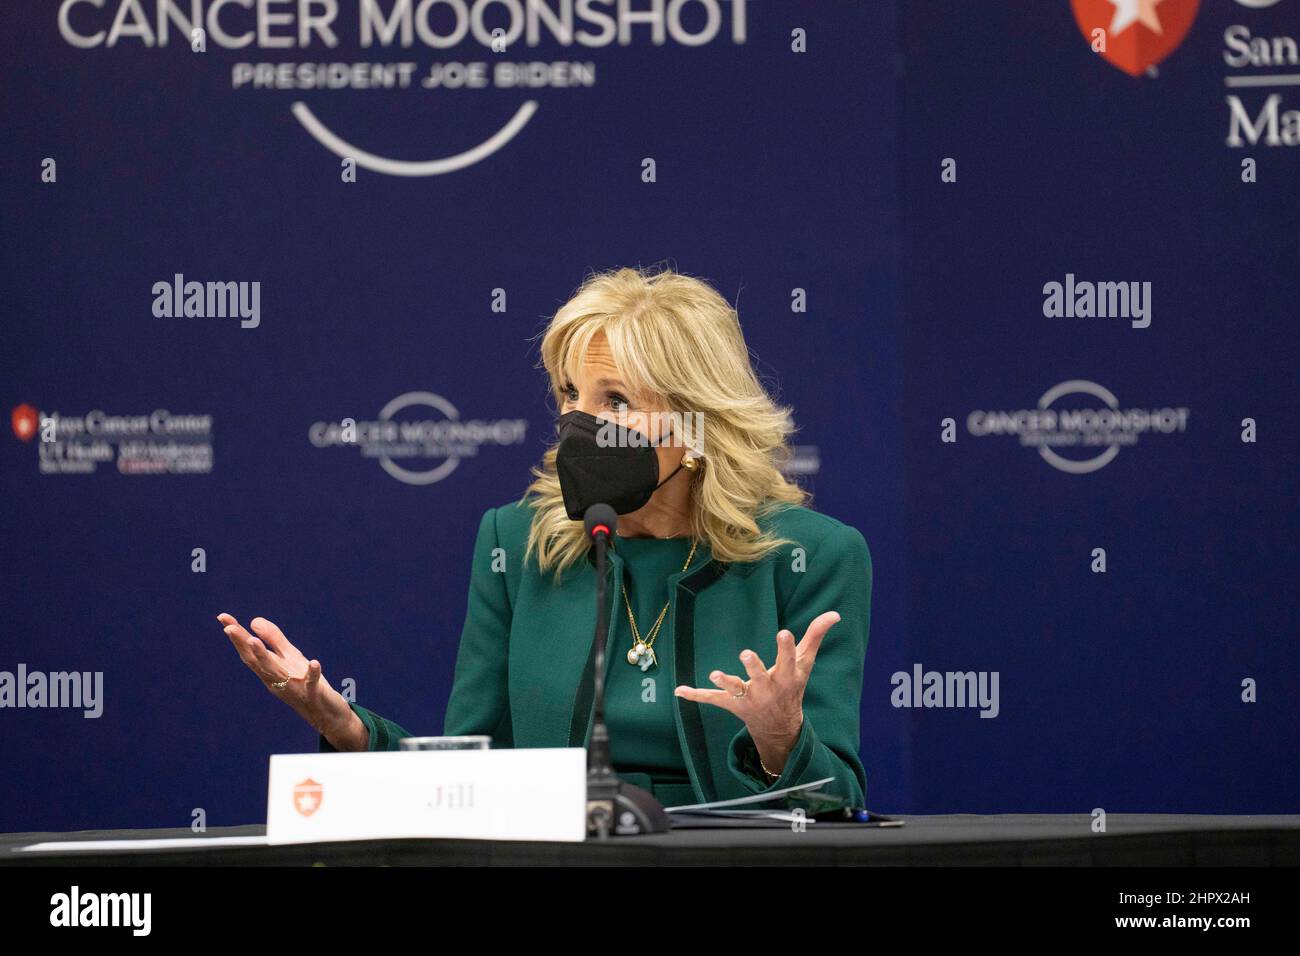 San Antonio, TX, USA. 23rd Feb, 2022. U.S. First Lady JILL BIDEN leads a discussion of doctors and researchers as she visits the Mays Cancer Center while on a tour of the UT Health MD Anderson Cancer facility. Biden listened to patients stories and heard from doctors on the front lines of cancer research. (Credit Image: © Bob Daemmrich/ZUMA Press Wire) Stock Photo